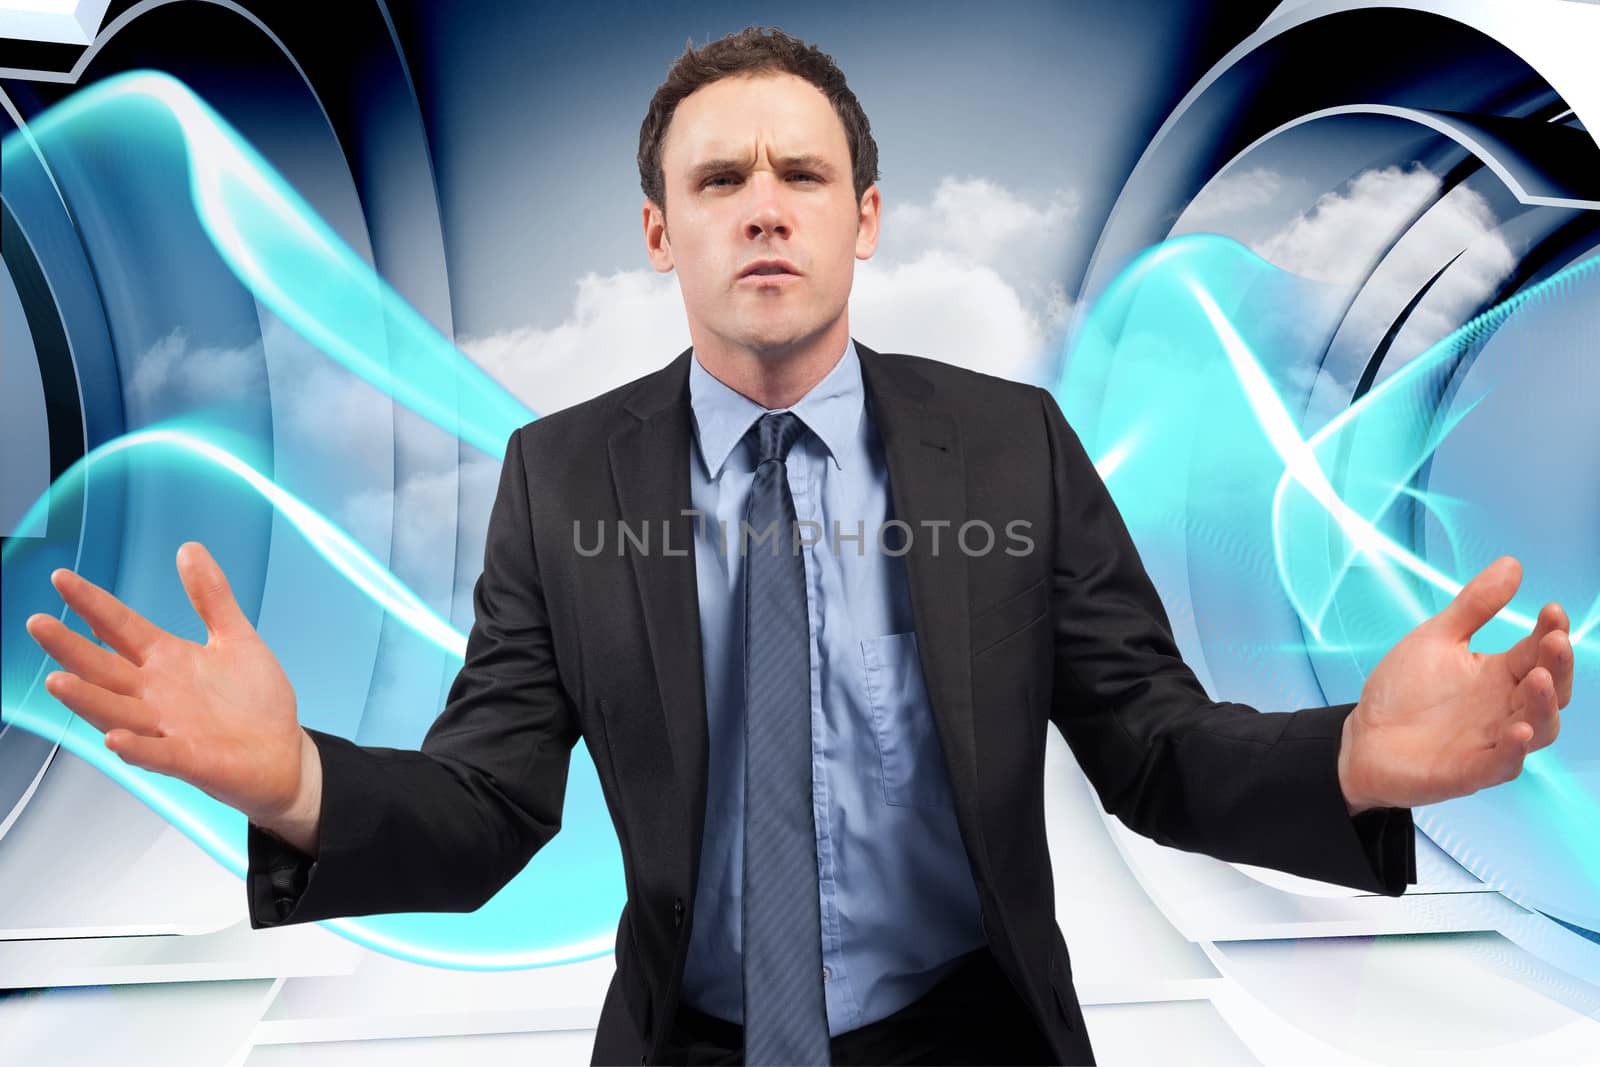 Businessman posing with arms out against blue abstract design in structure 